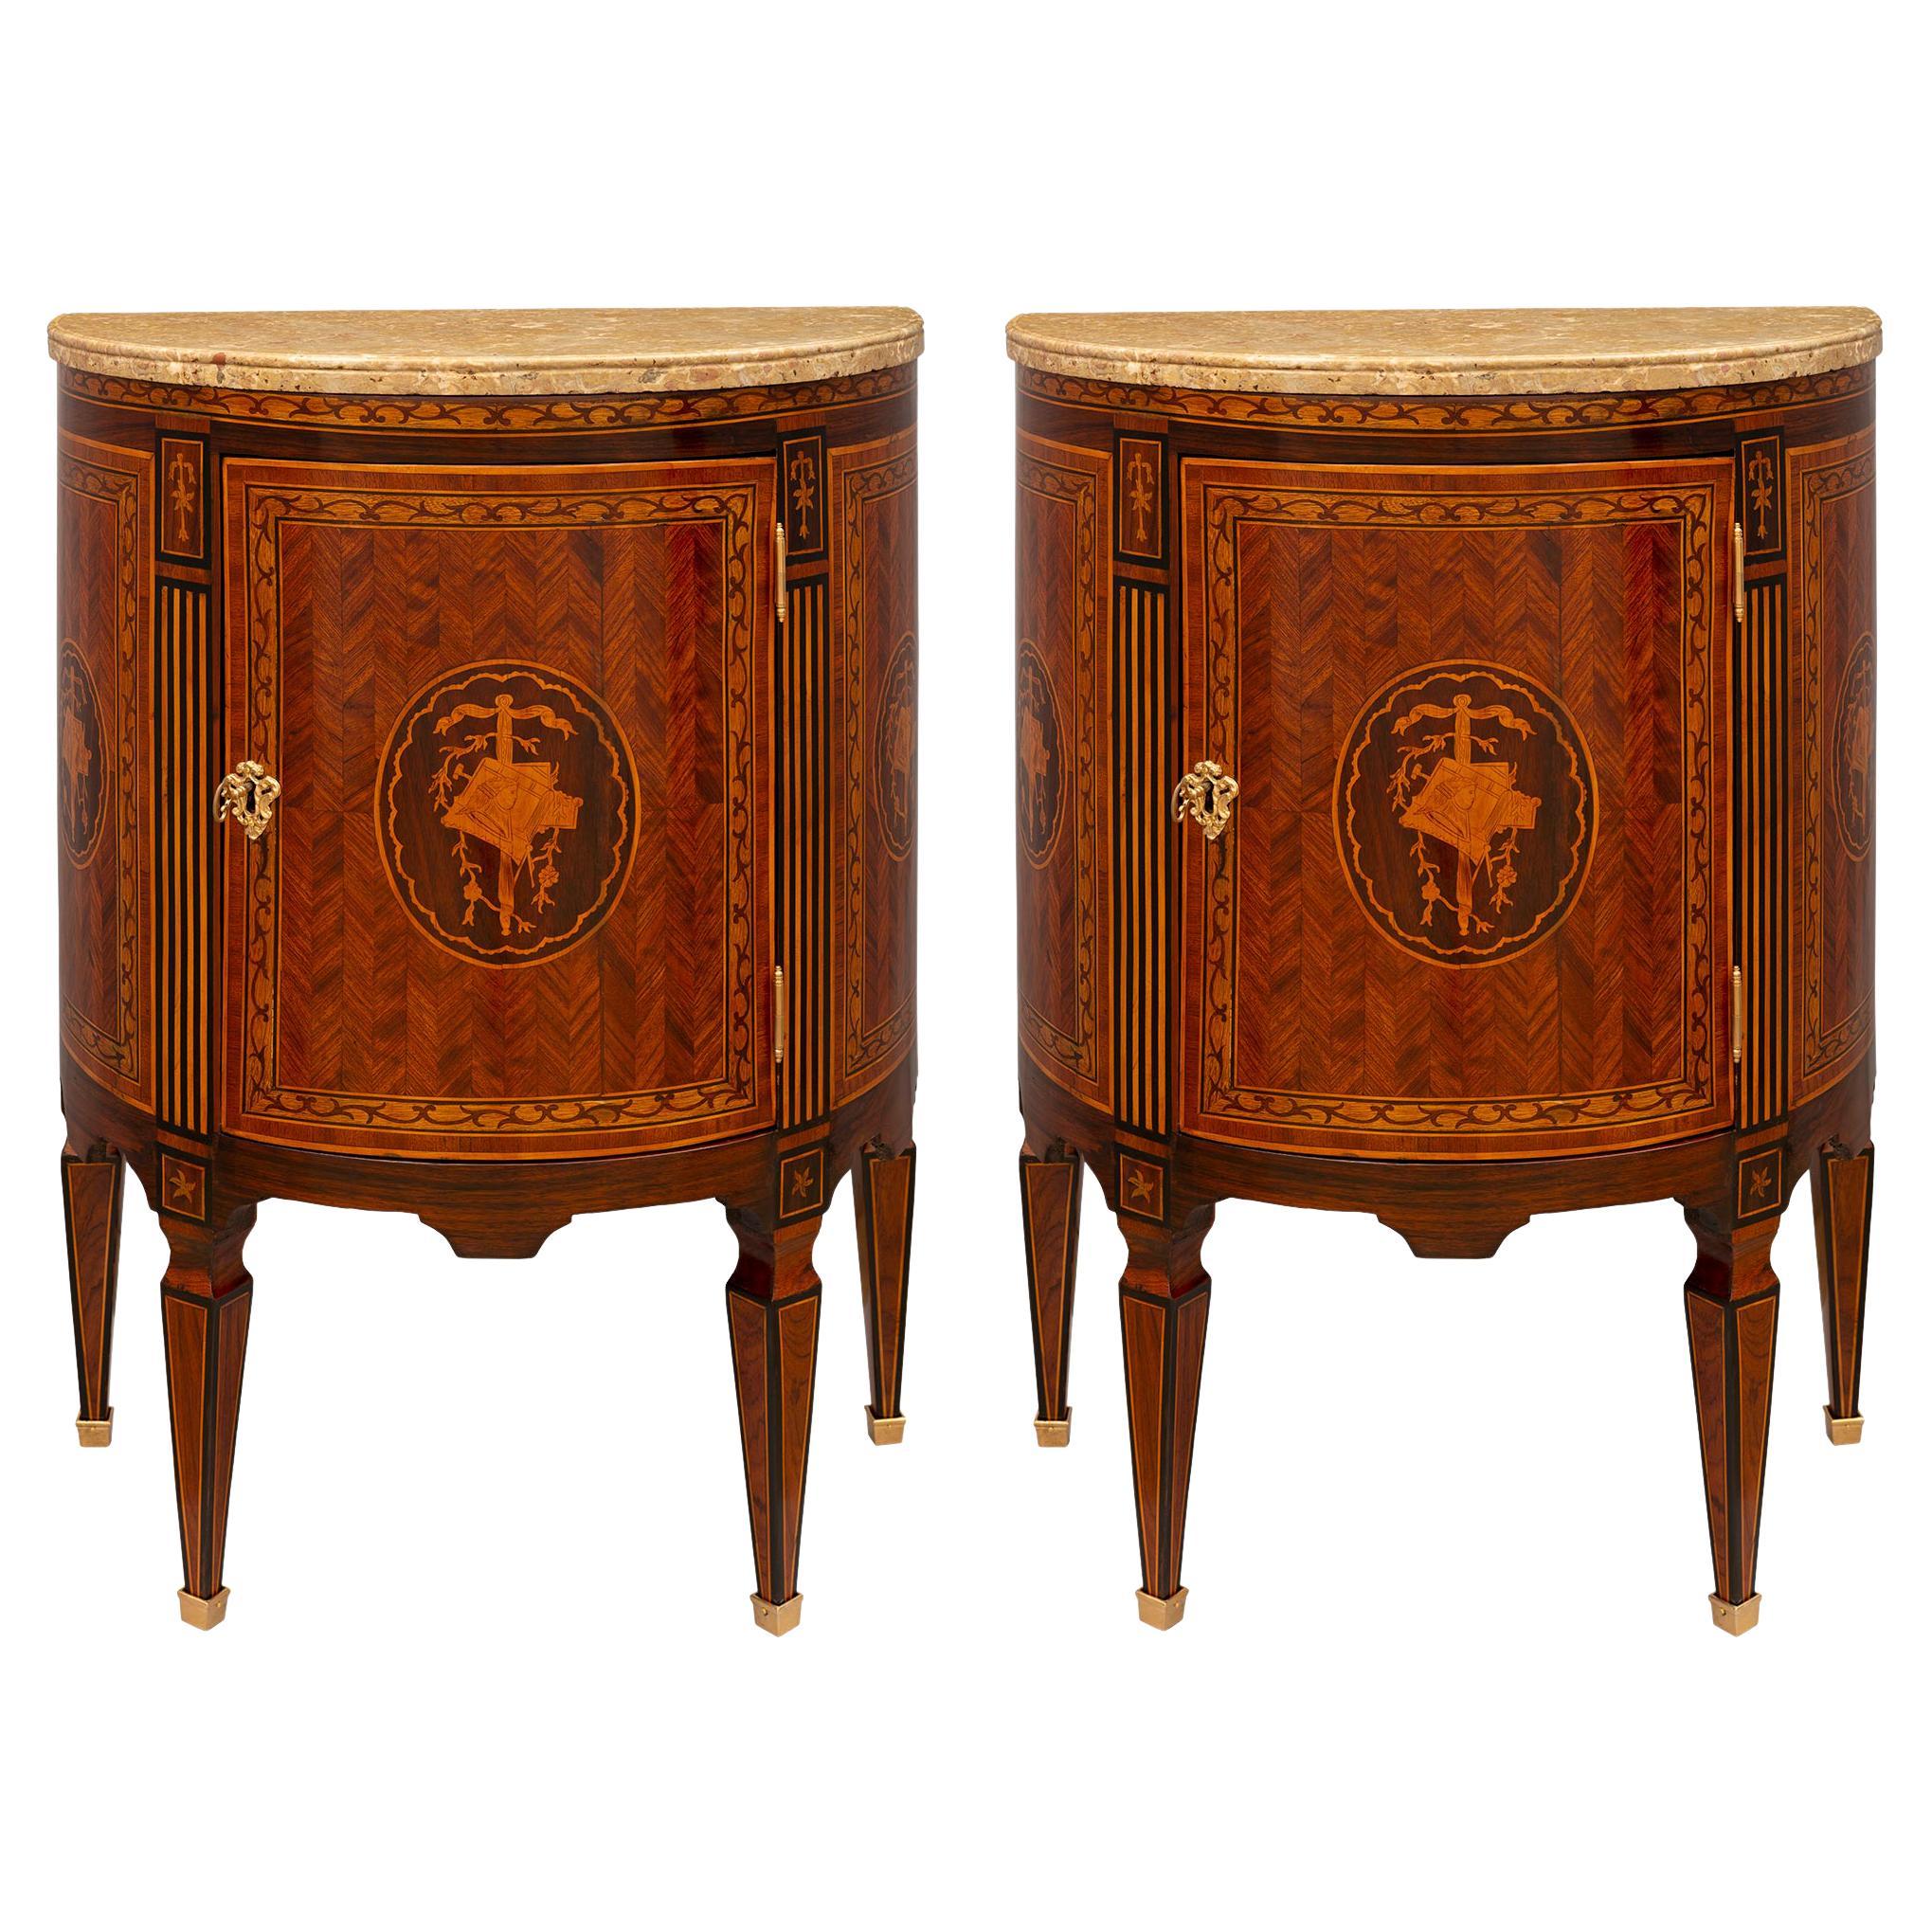 Pair of Italian 18th Century Louis XVI Period Chests/Side Tables For Sale